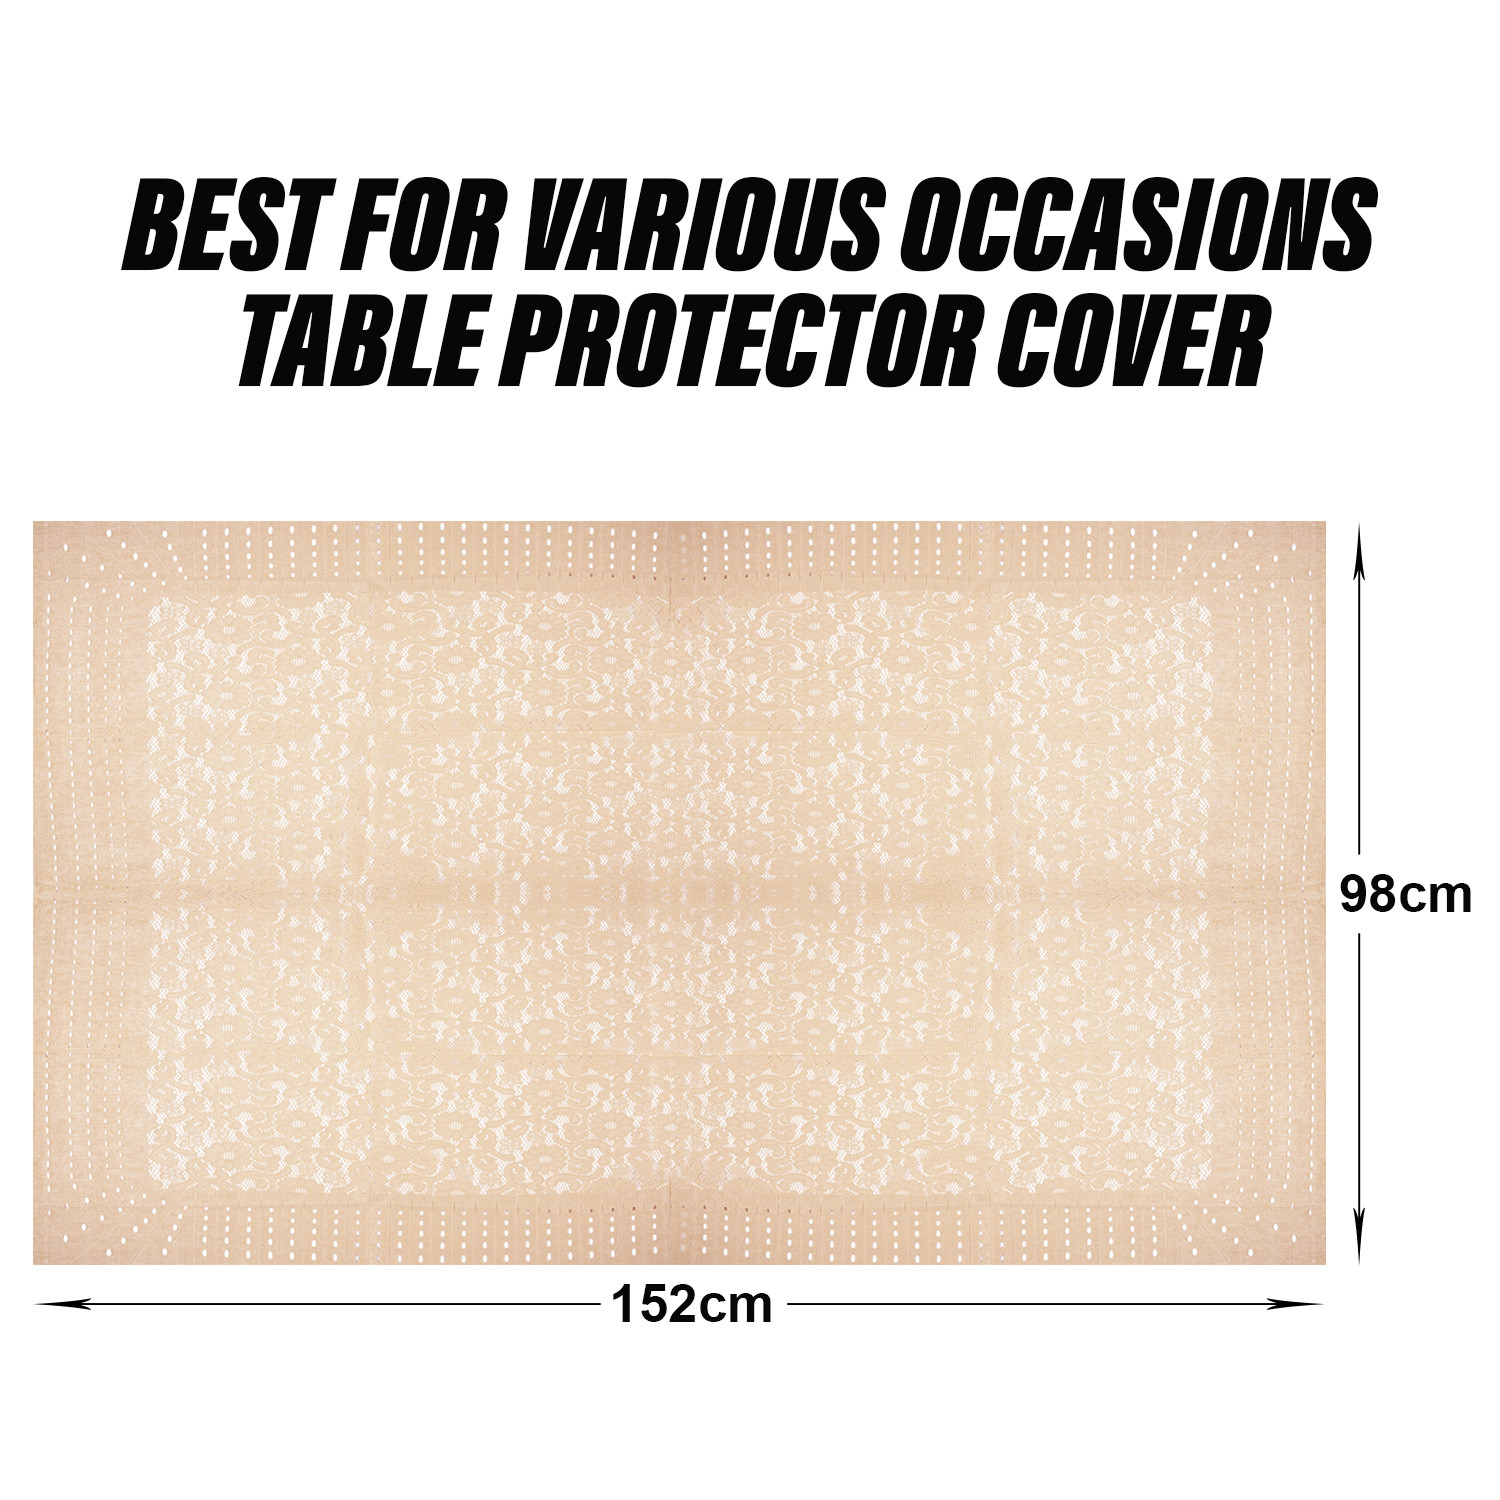 Kuber Industries Center Table Cover | Shinning Net Cashew Design Table Cover | Luxurious Table Protector Cover for Home Decor | 40x60 Inch | Cream